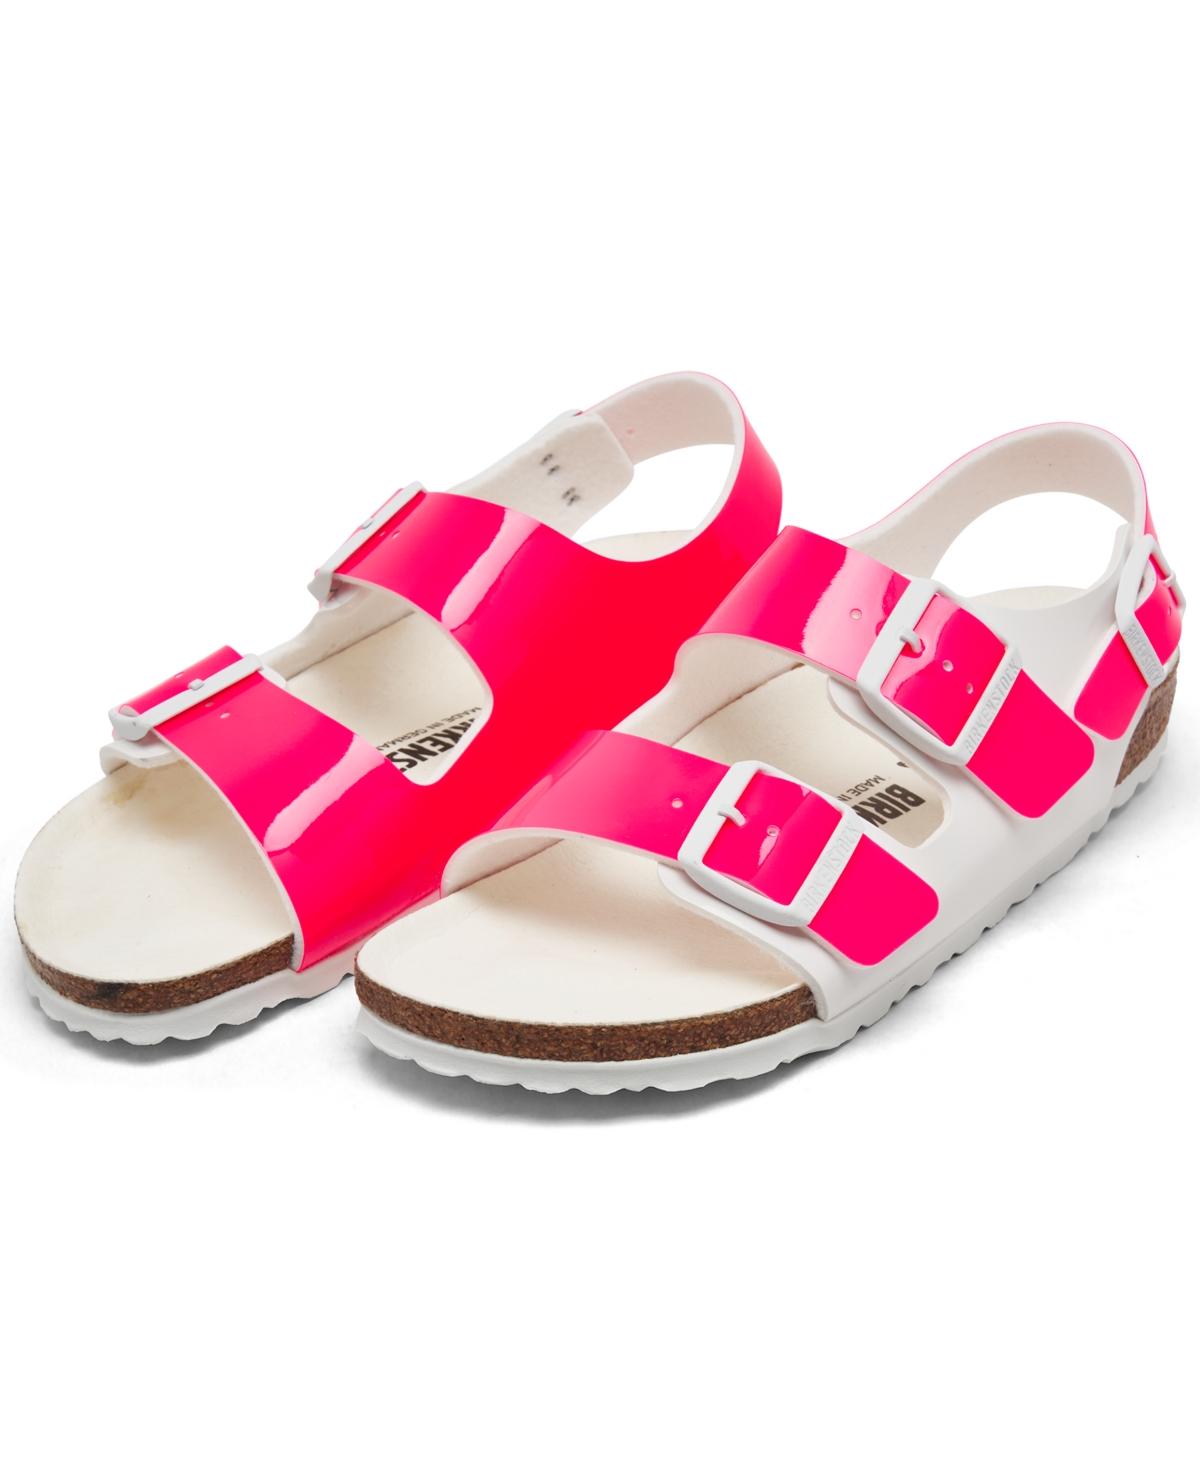 Birkenstock Milano Patent Leather Birko-flor Sandals From Finish Line in  Pink | Lyst